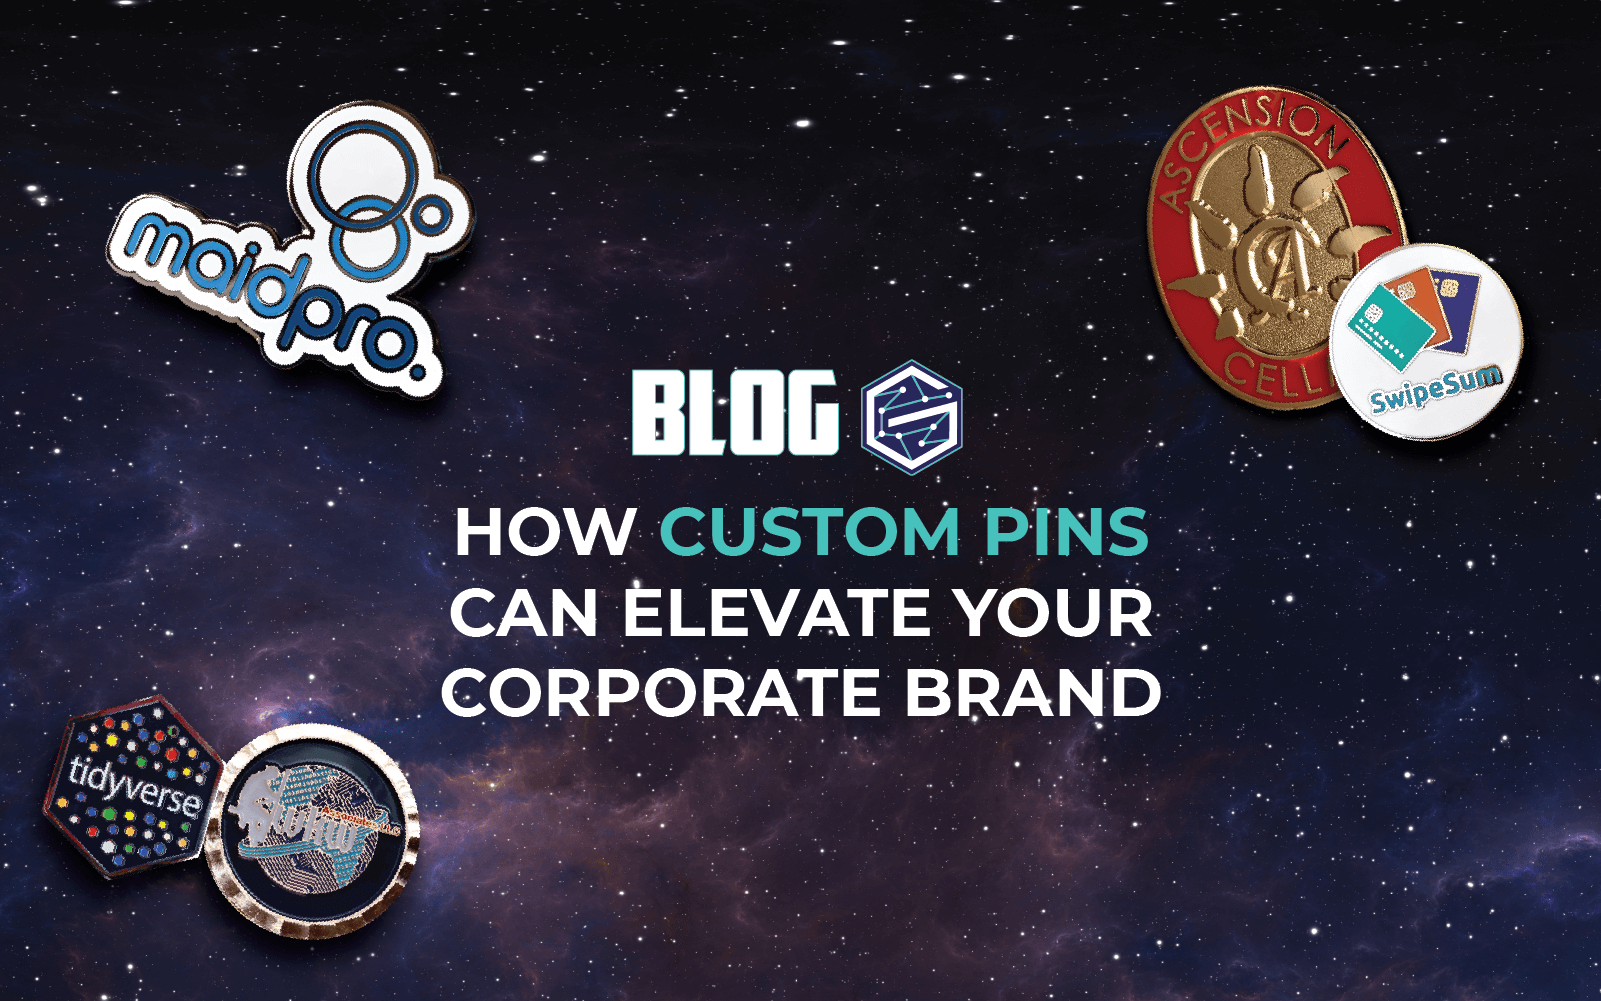 How custom pins can elevate your corporate brand - Galaxy Design Squad - Blog